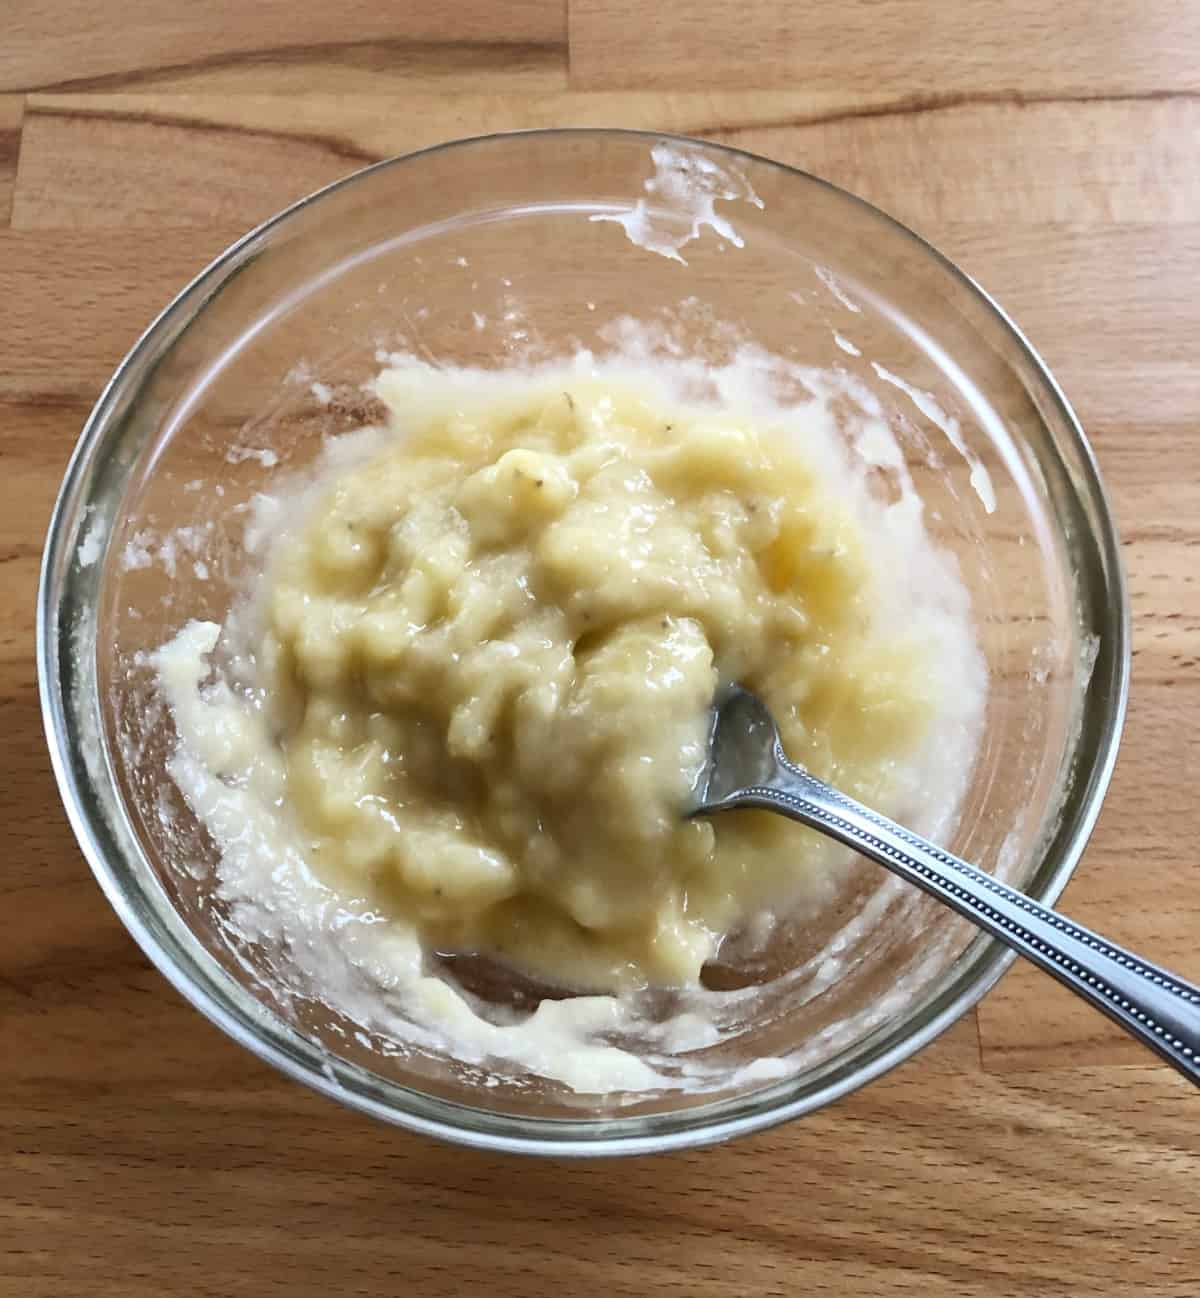 Mashed overripe banana in glass bowl with fork.